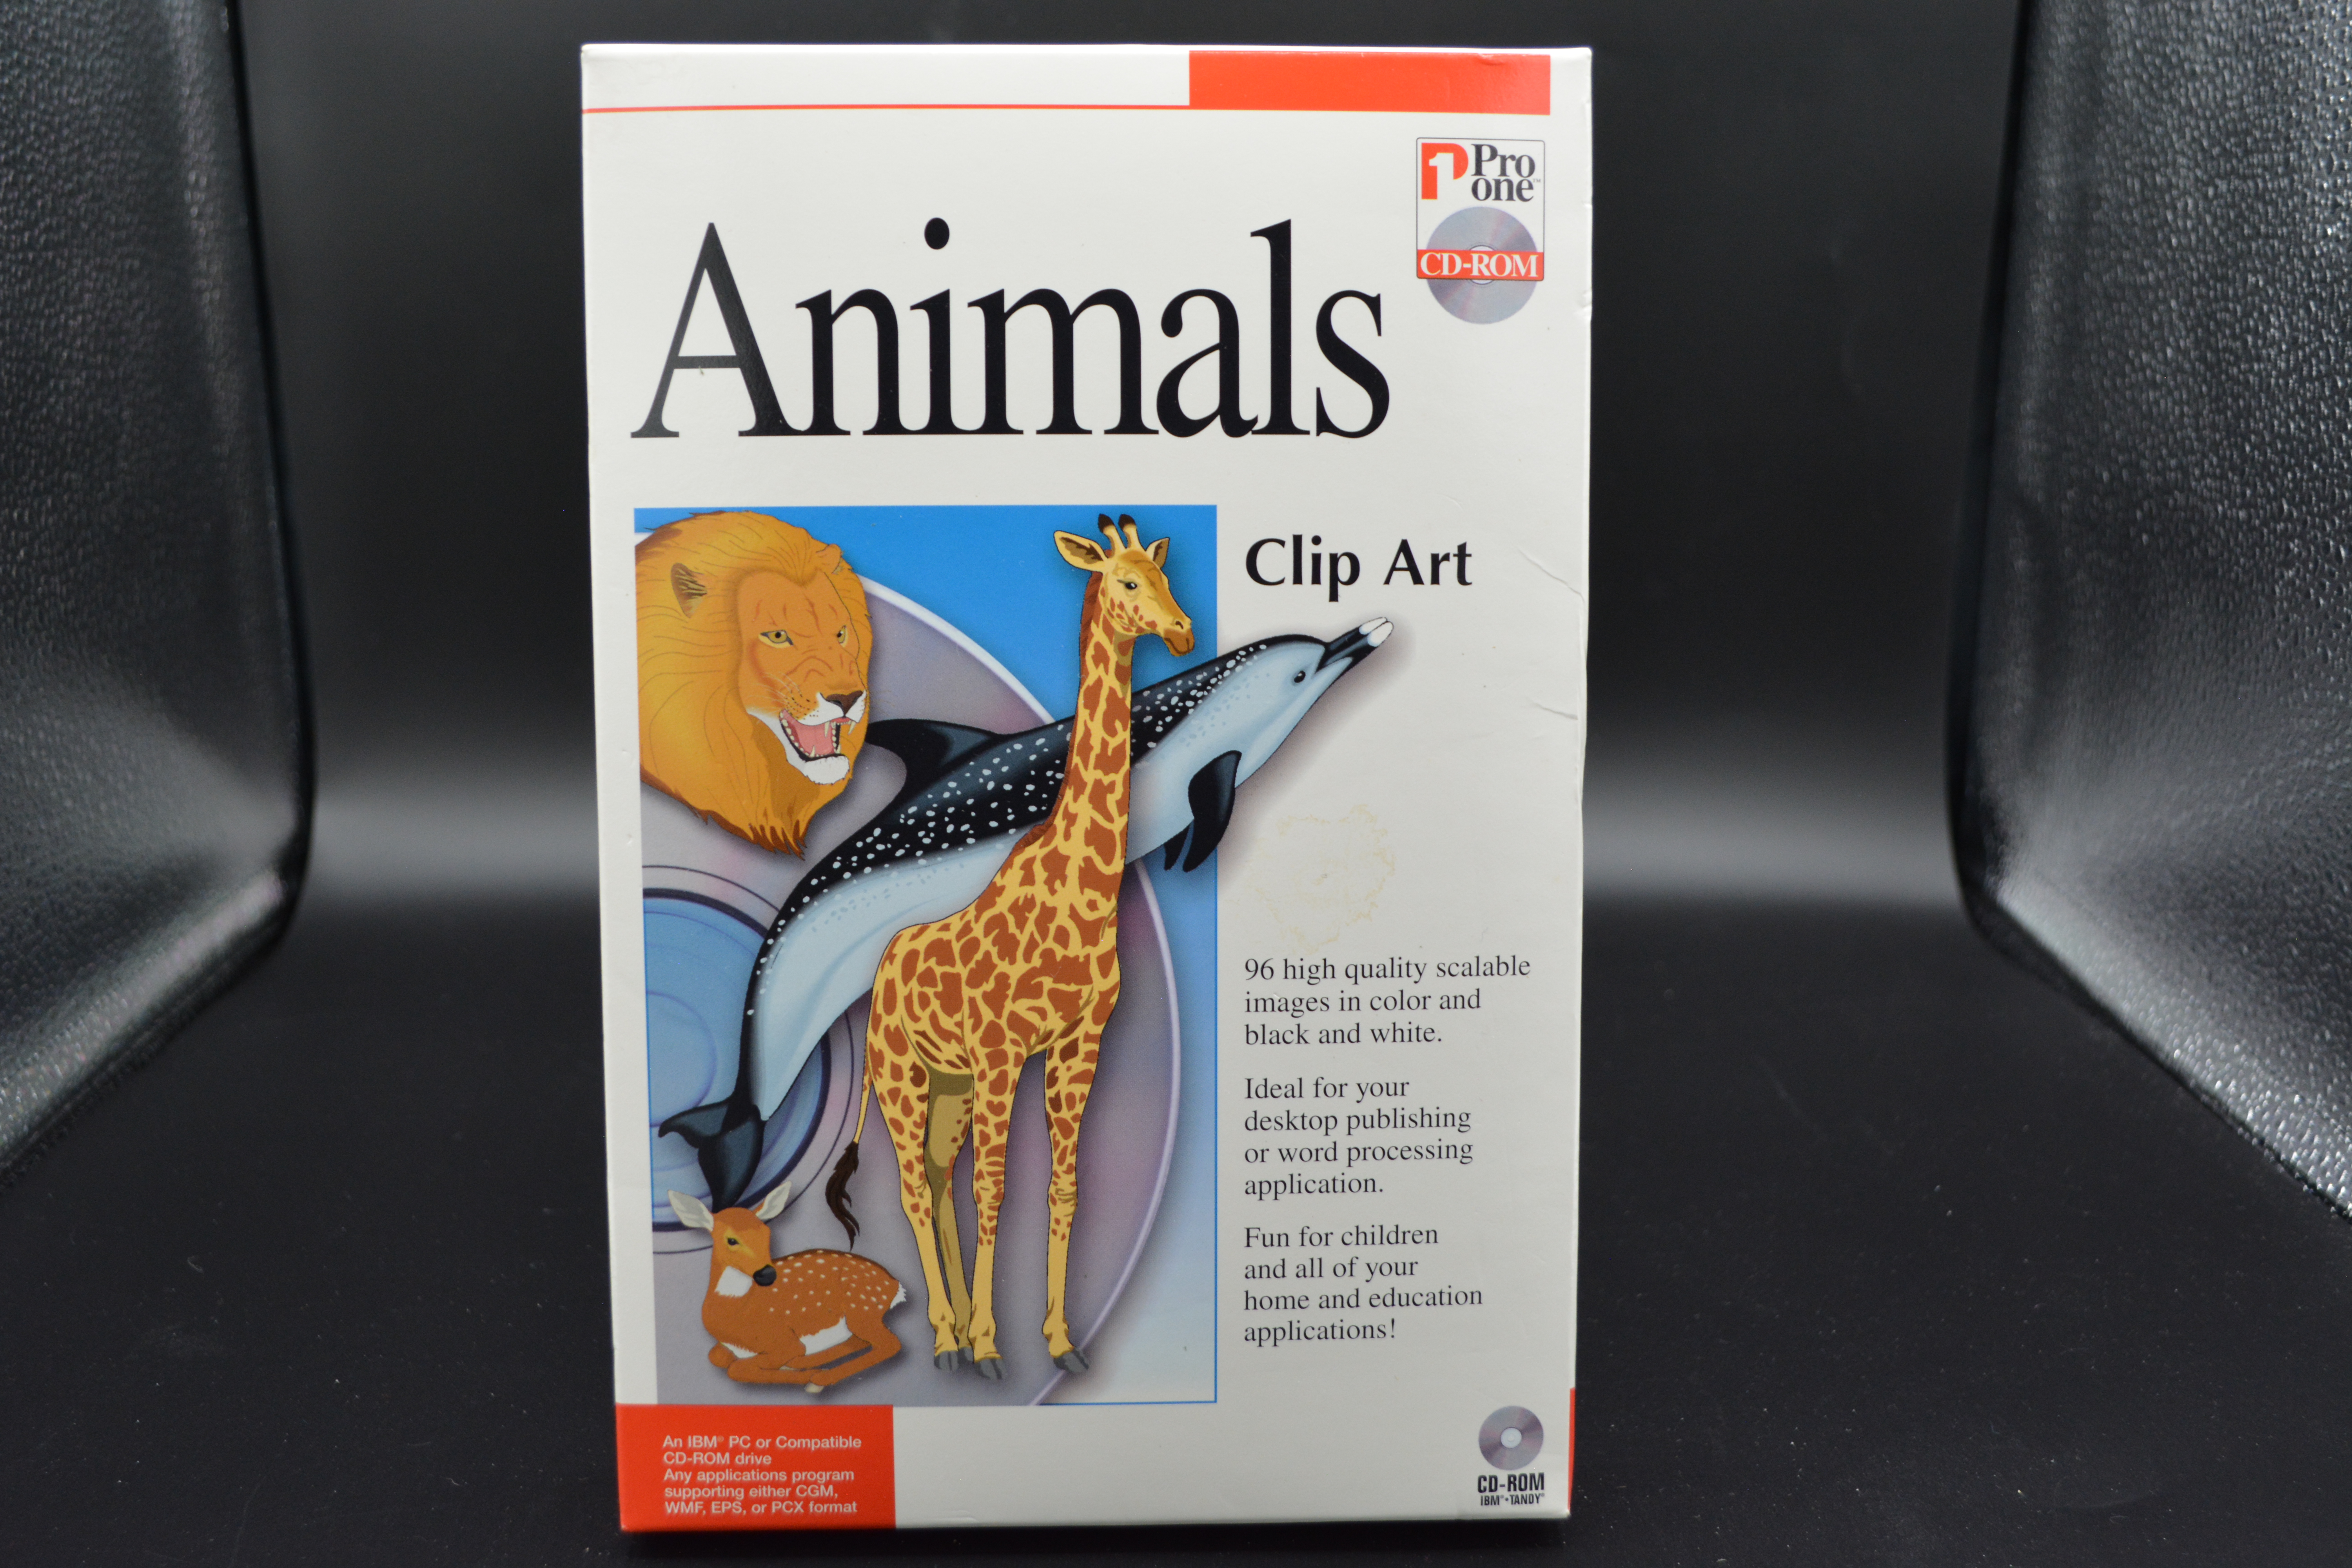 Animals Clip Art : Free Download, Borrow, and Streaming : Internet Archive